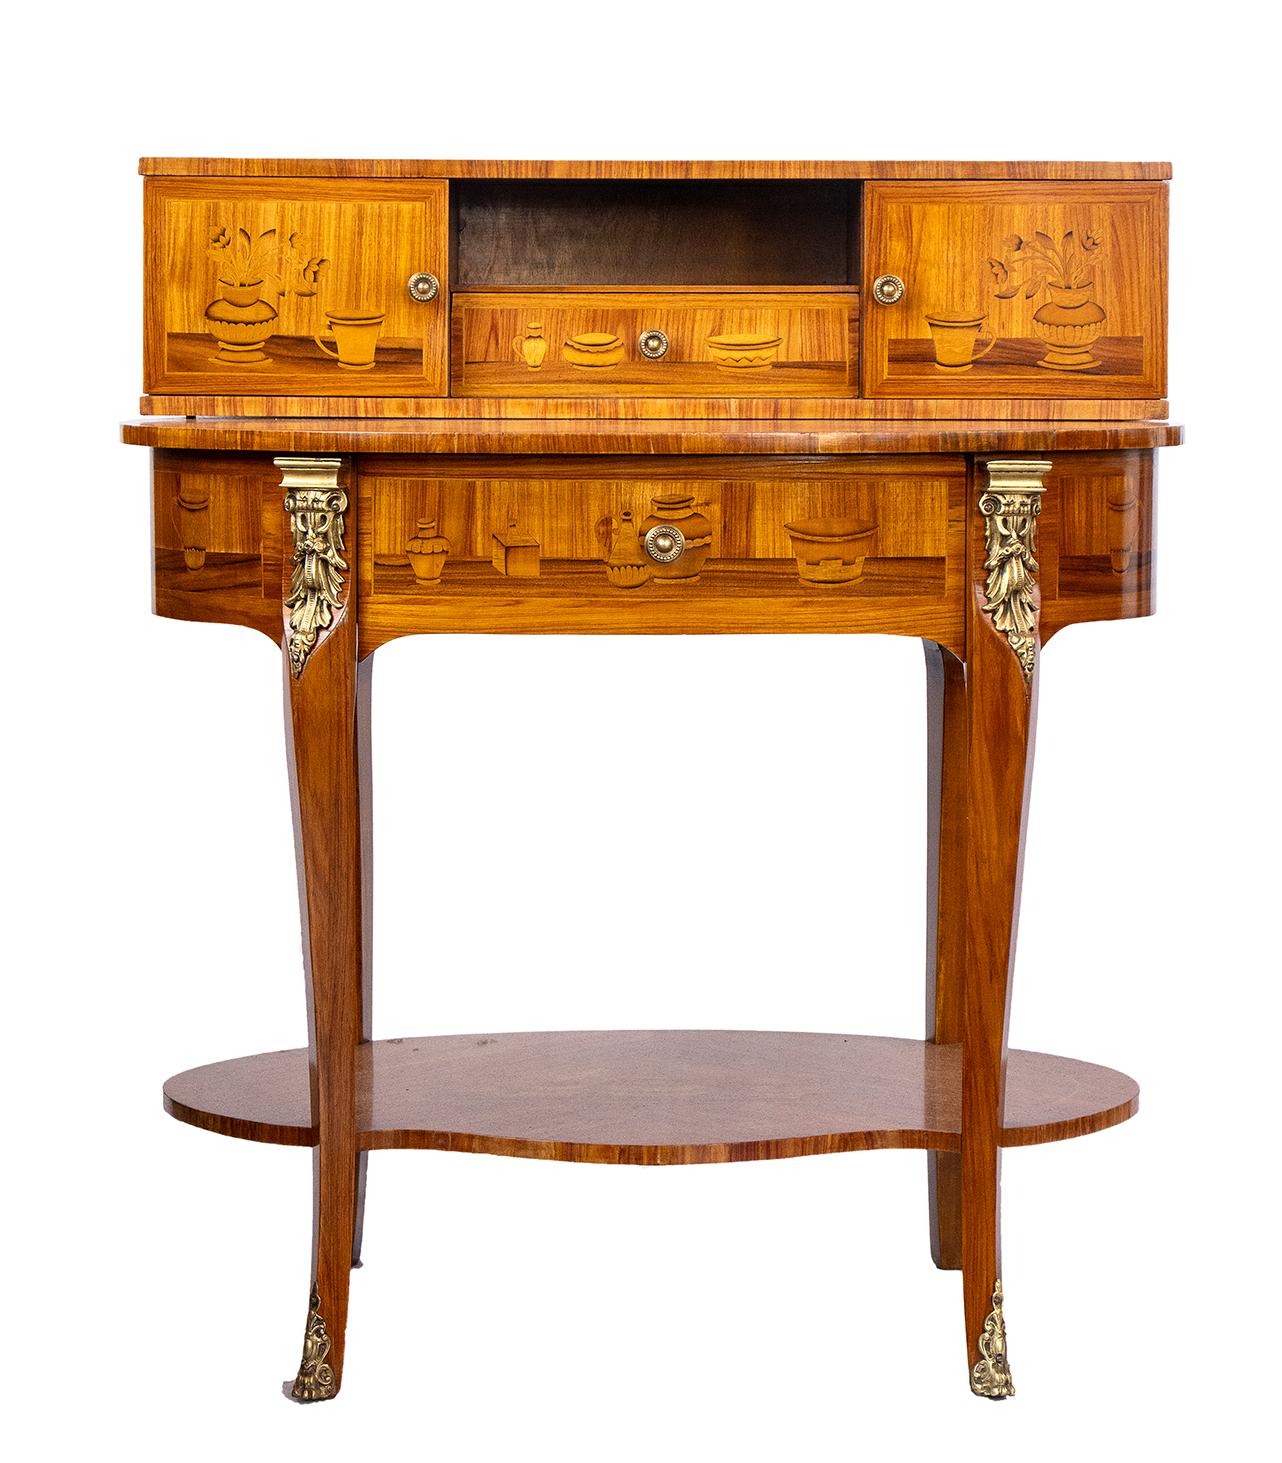 Purple ebony centre desk - France, 20th century, in the manner of CHARLES TOPINO, XIX century
Purple ebony inlaid with fruit wood with veneered top and table representing still life motifs.
Height x width x depth: 95 x 85 x 58.5 cm.
Item condition